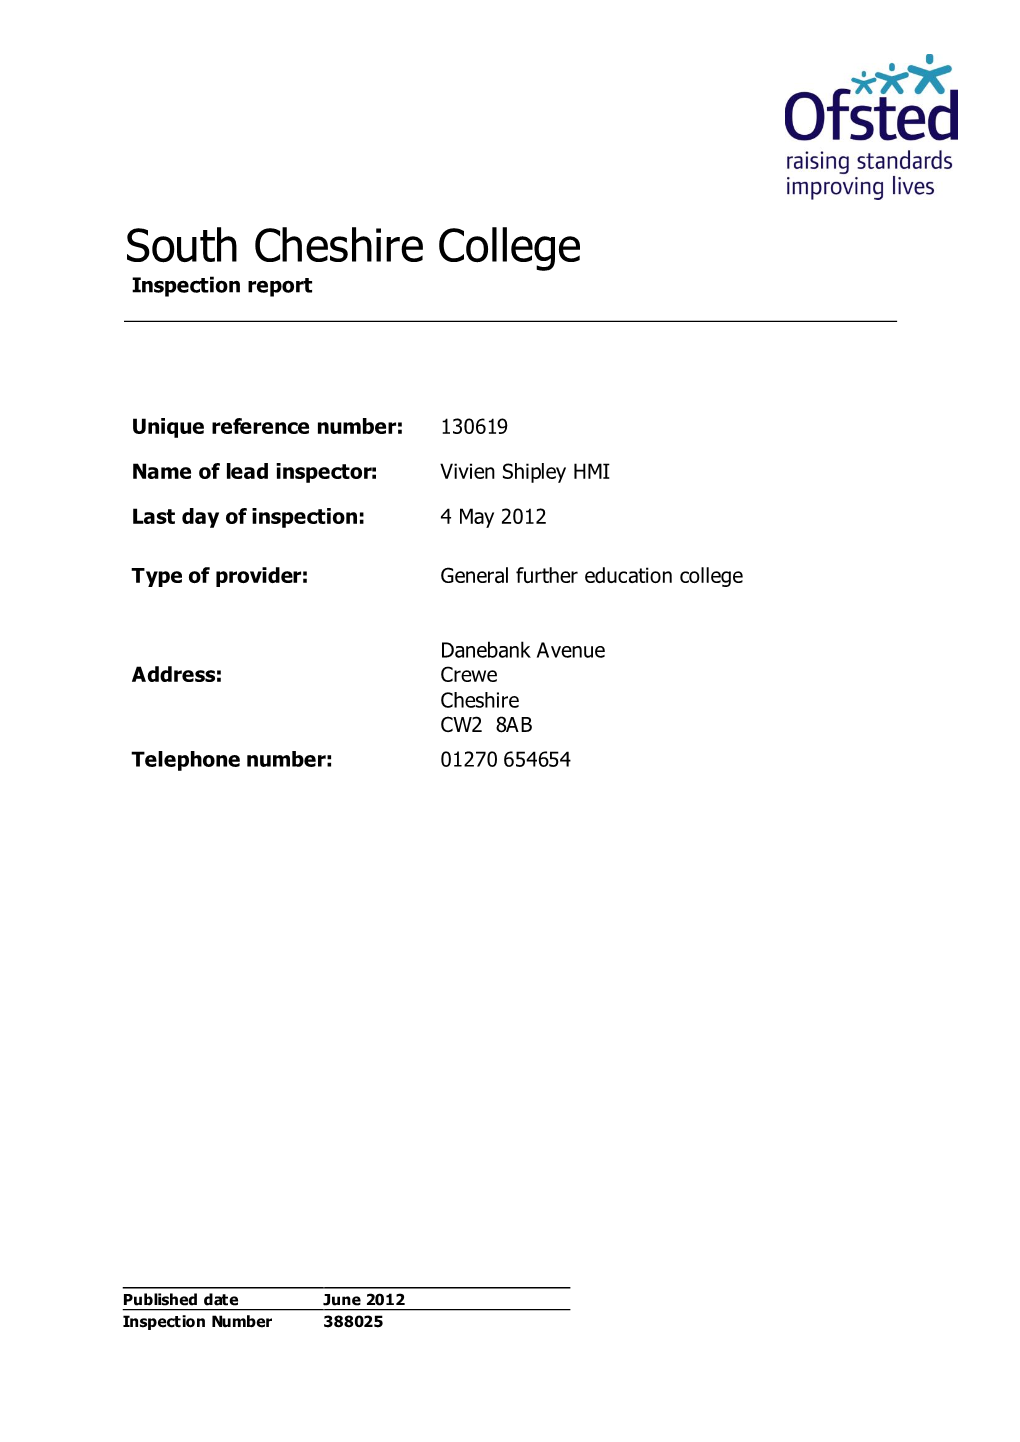 South Cheshire College Inspection Report